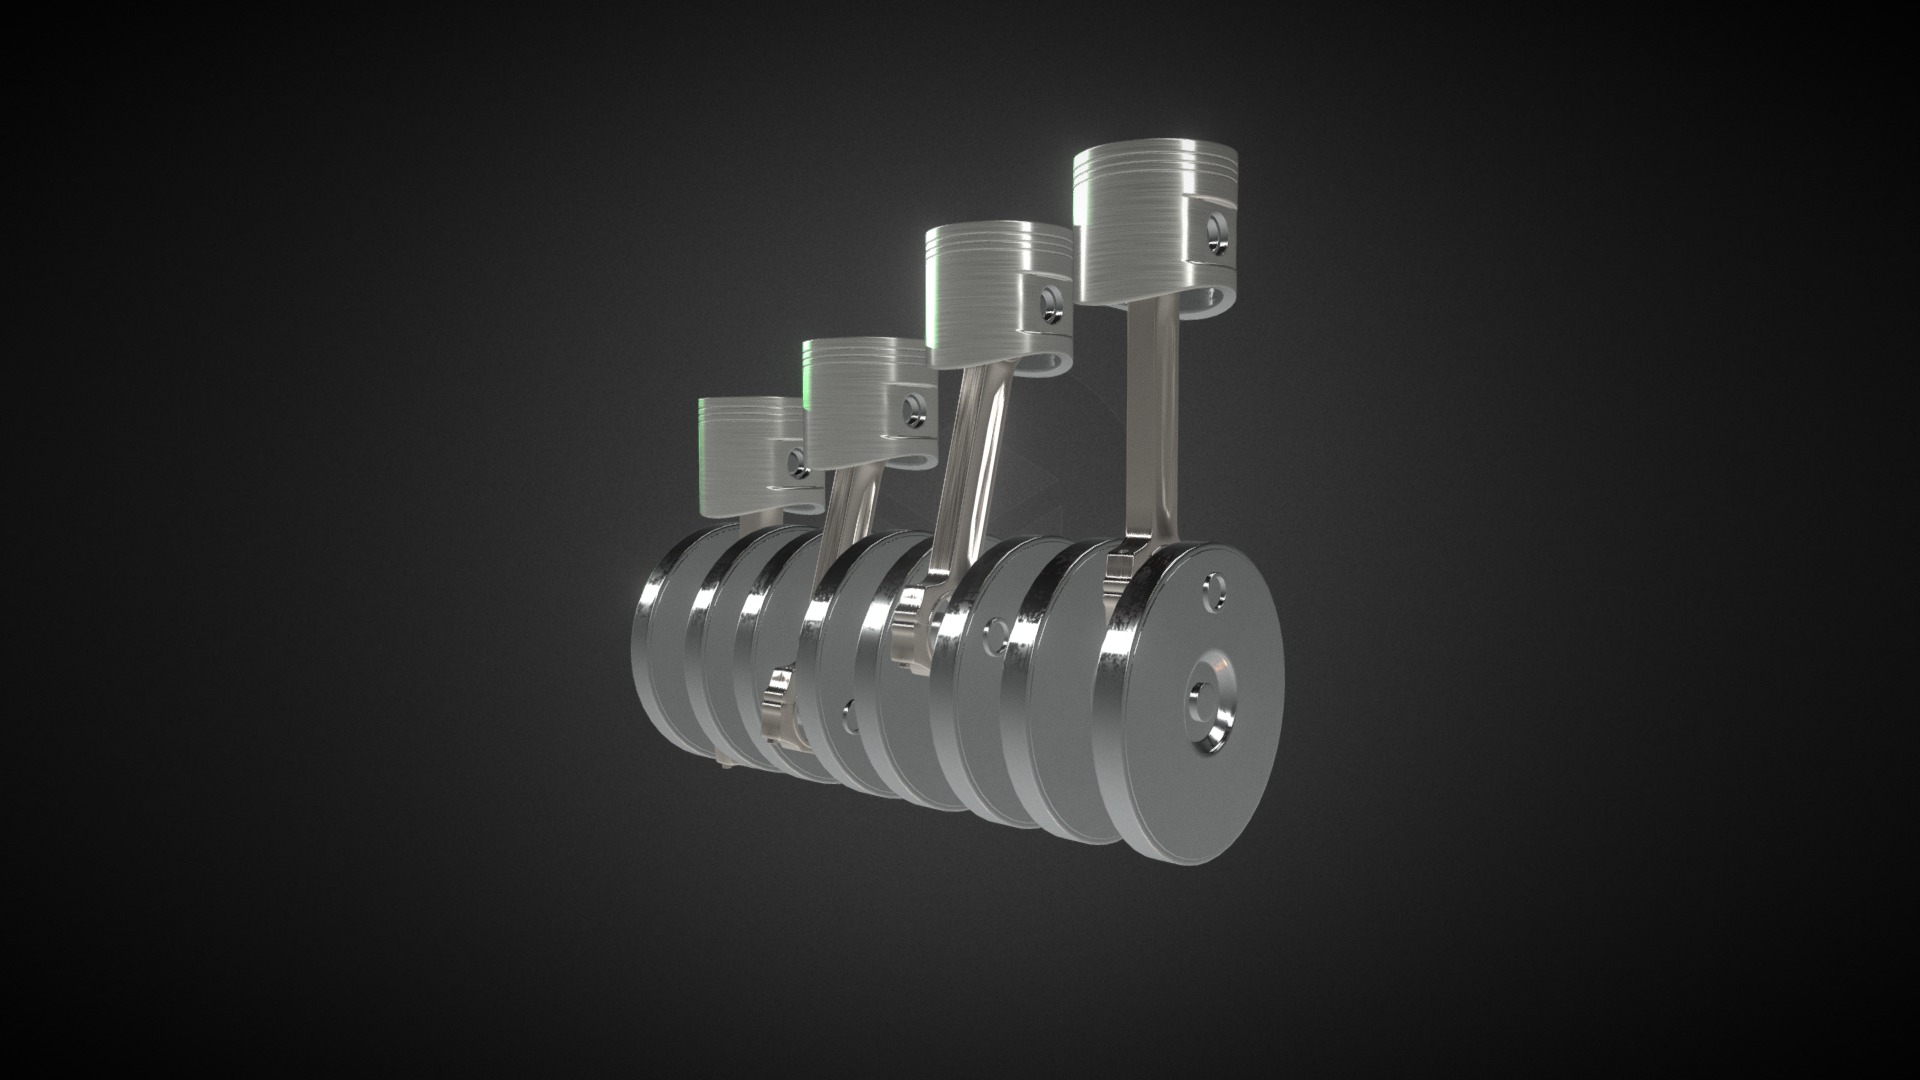 3D model Piston Animaterd - This is a 3D model of the Piston Animaterd. The 3D model is about a light bulb with a black background.